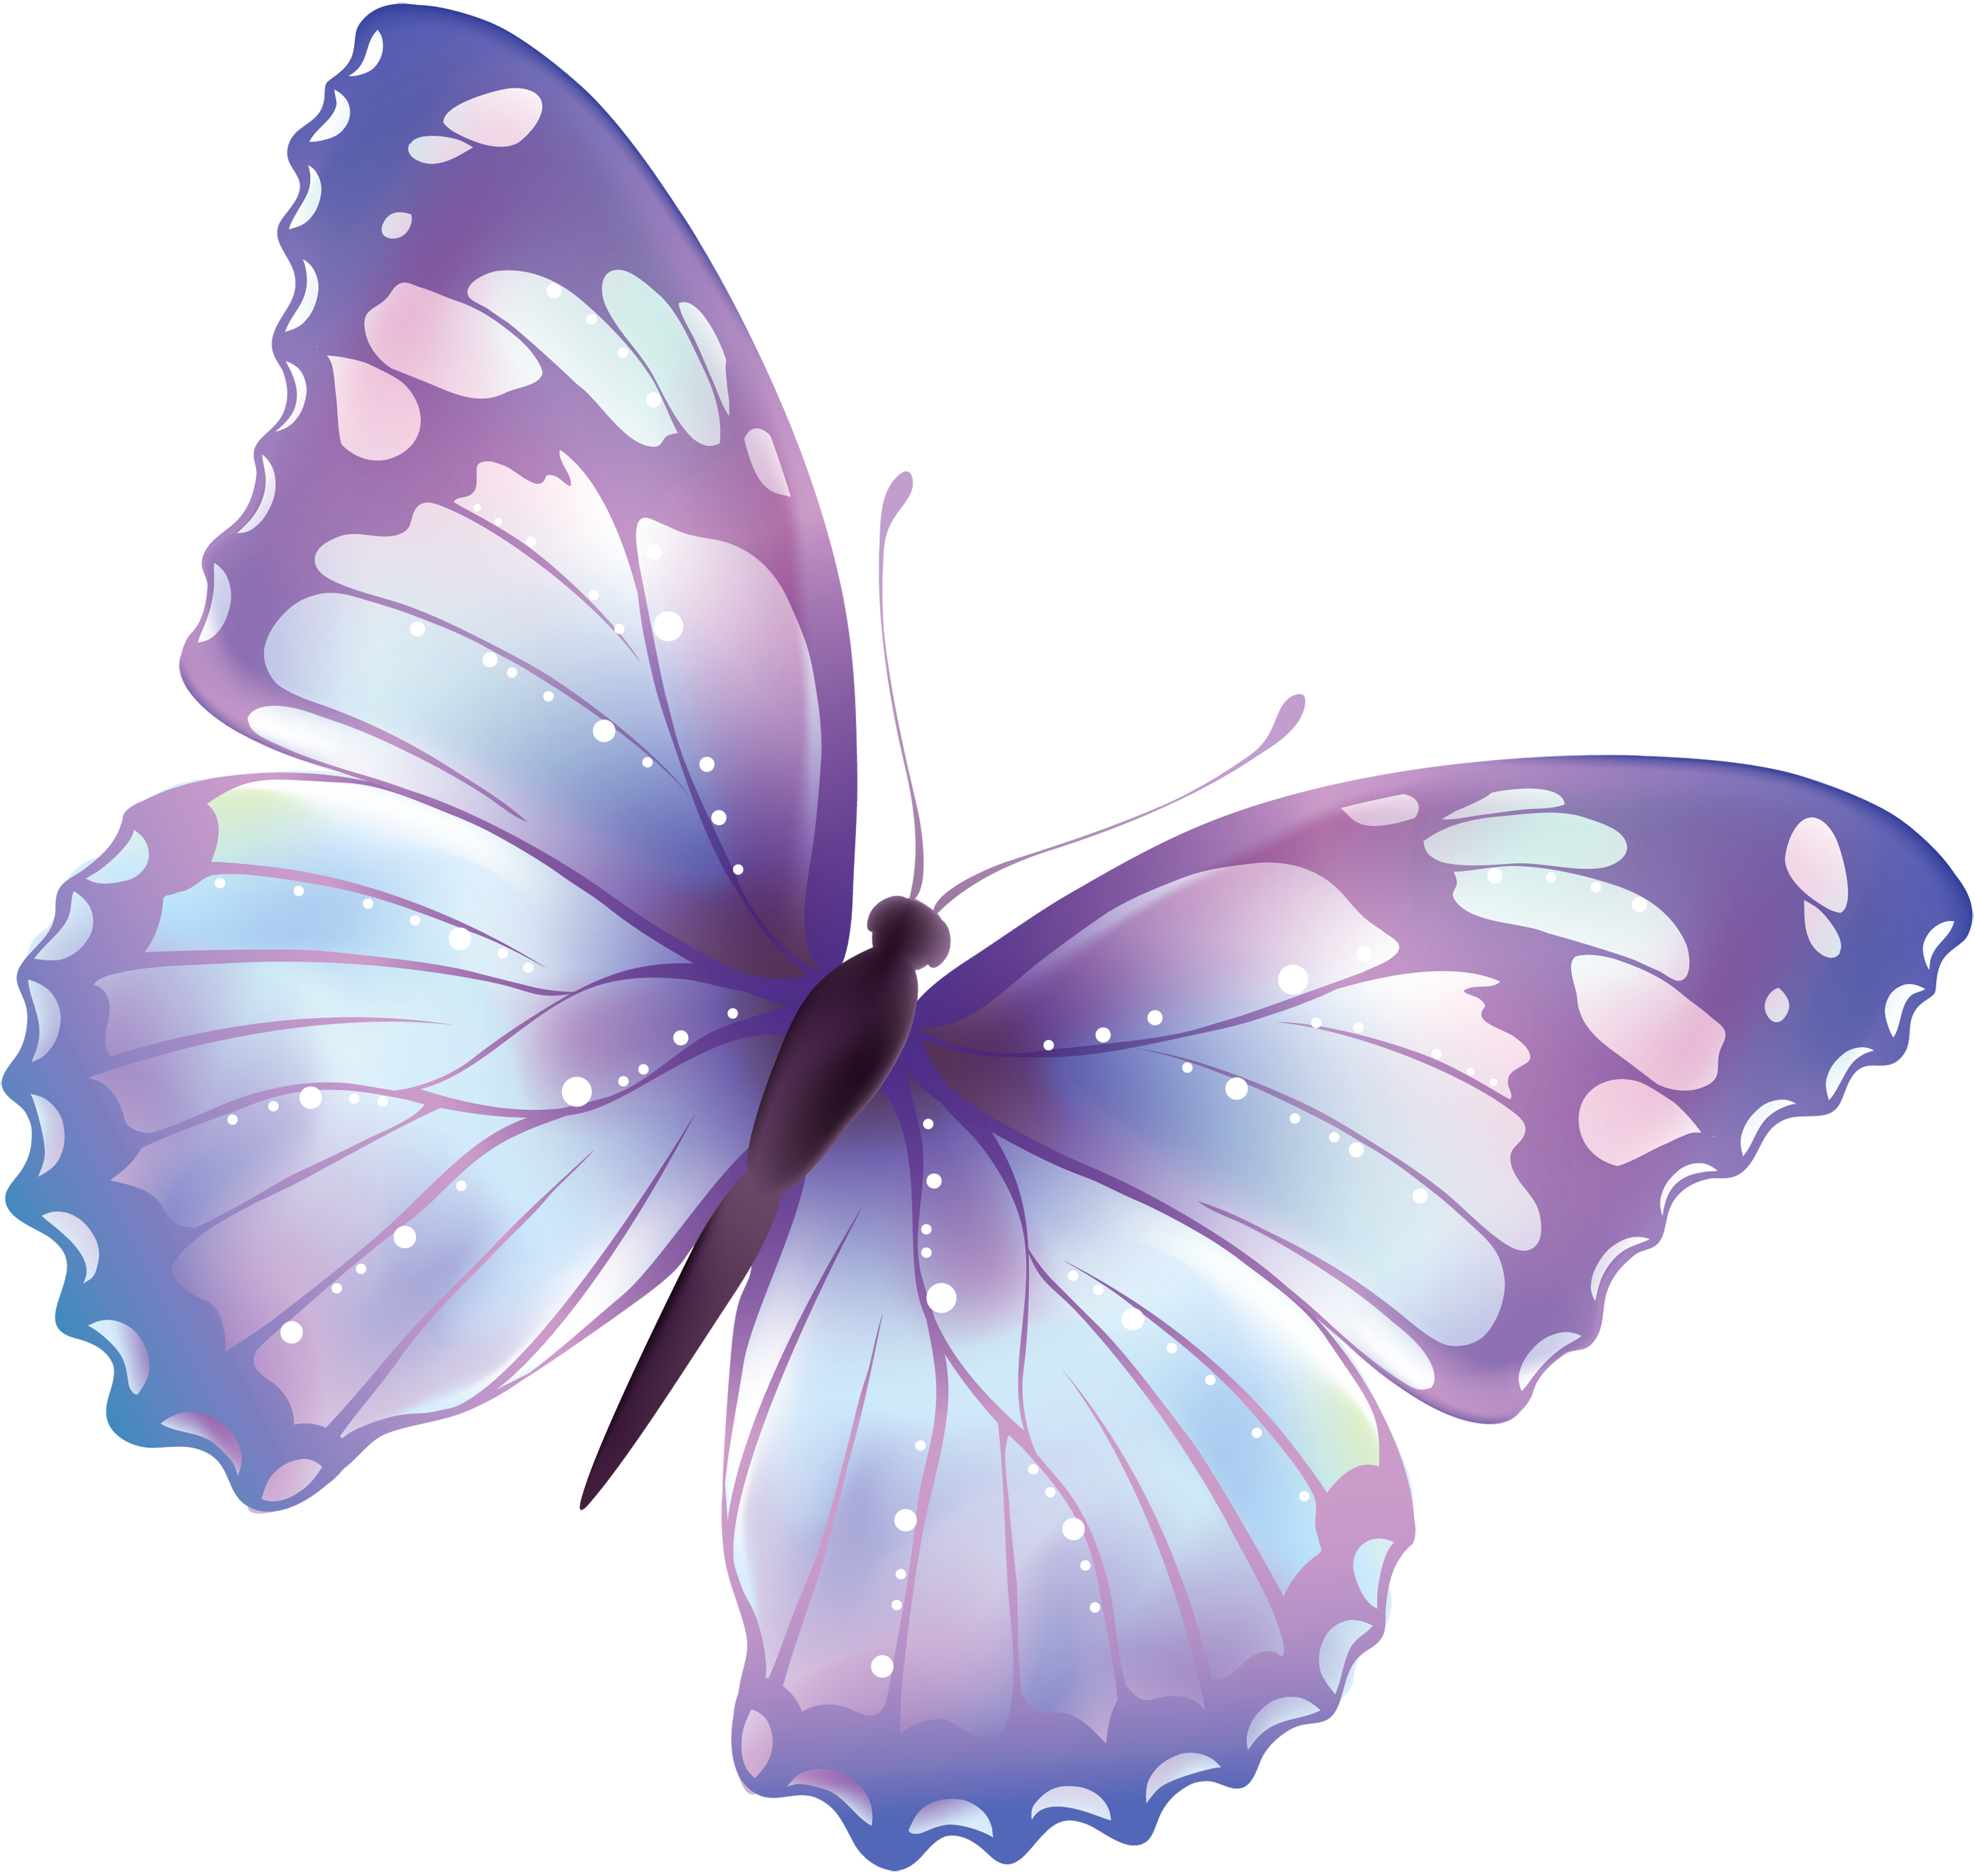 Purple butterfly png clipart 